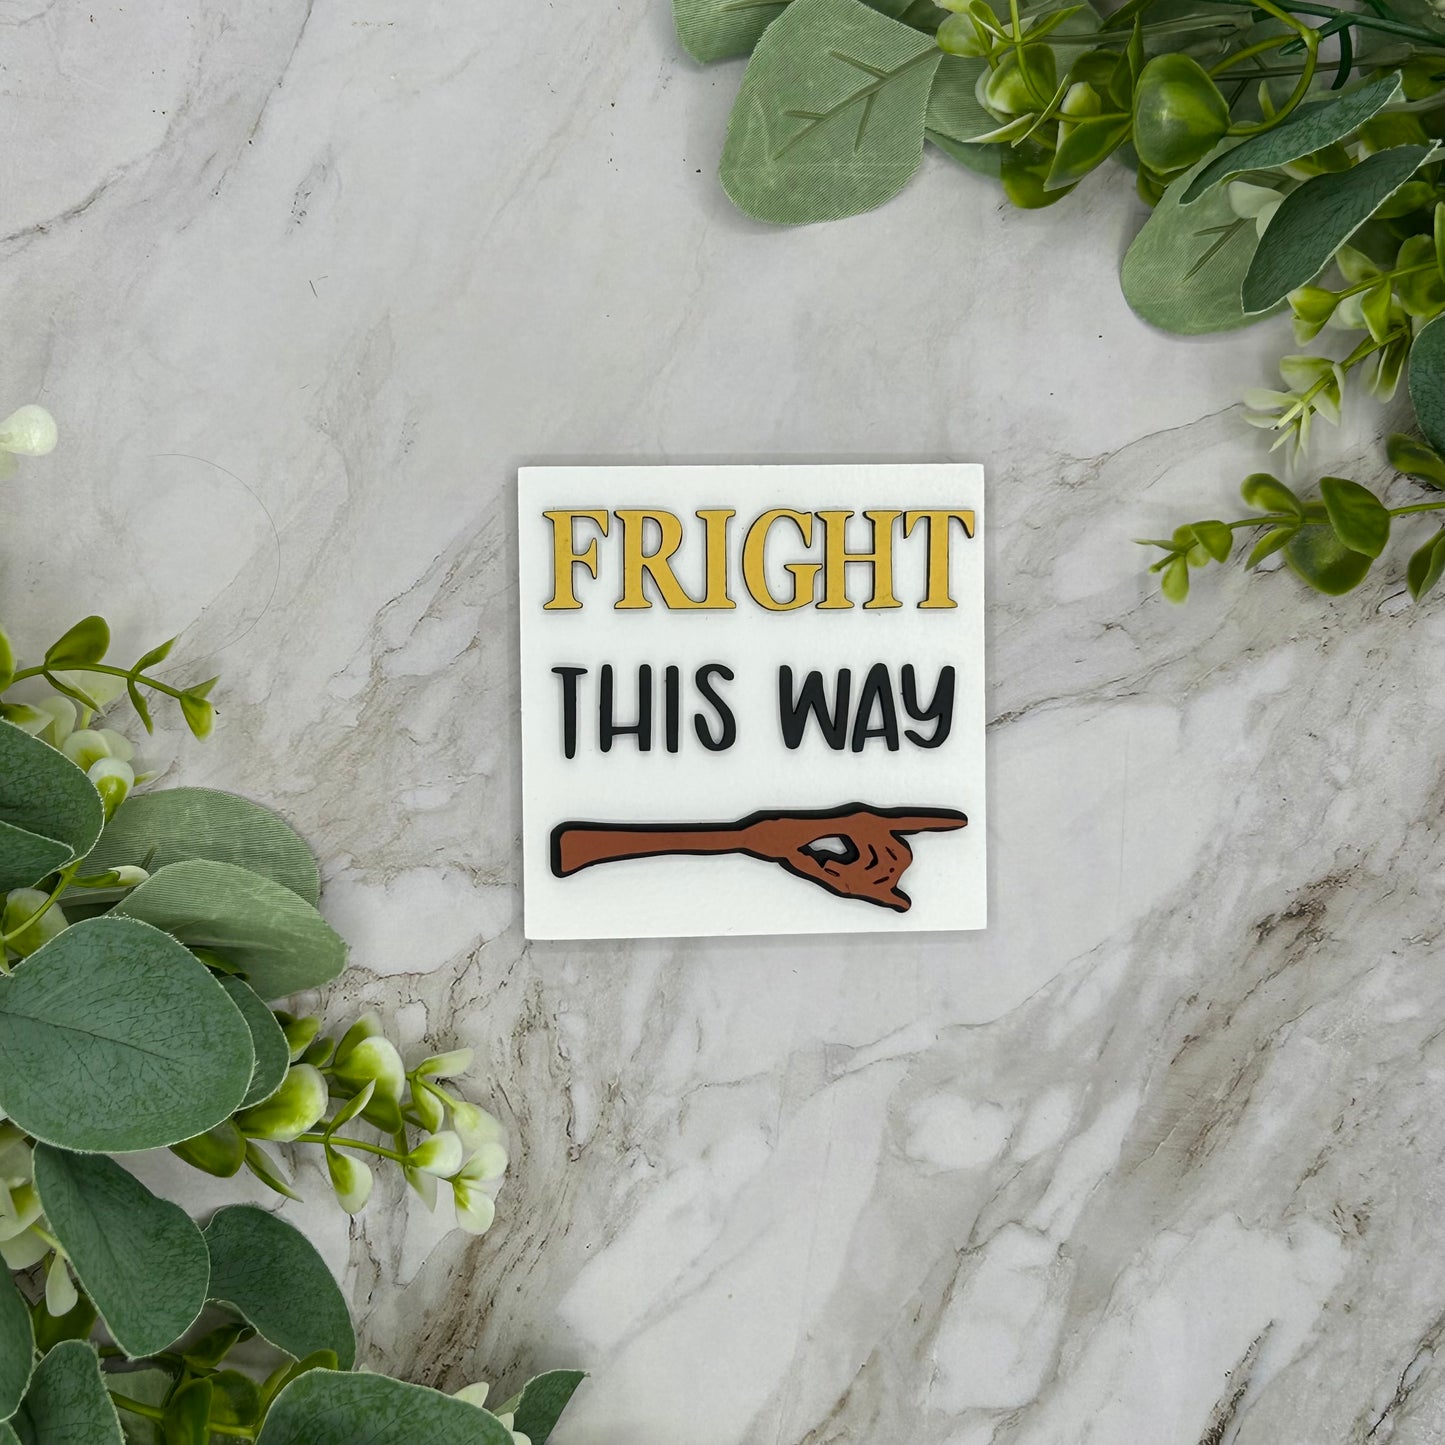 Fright this way